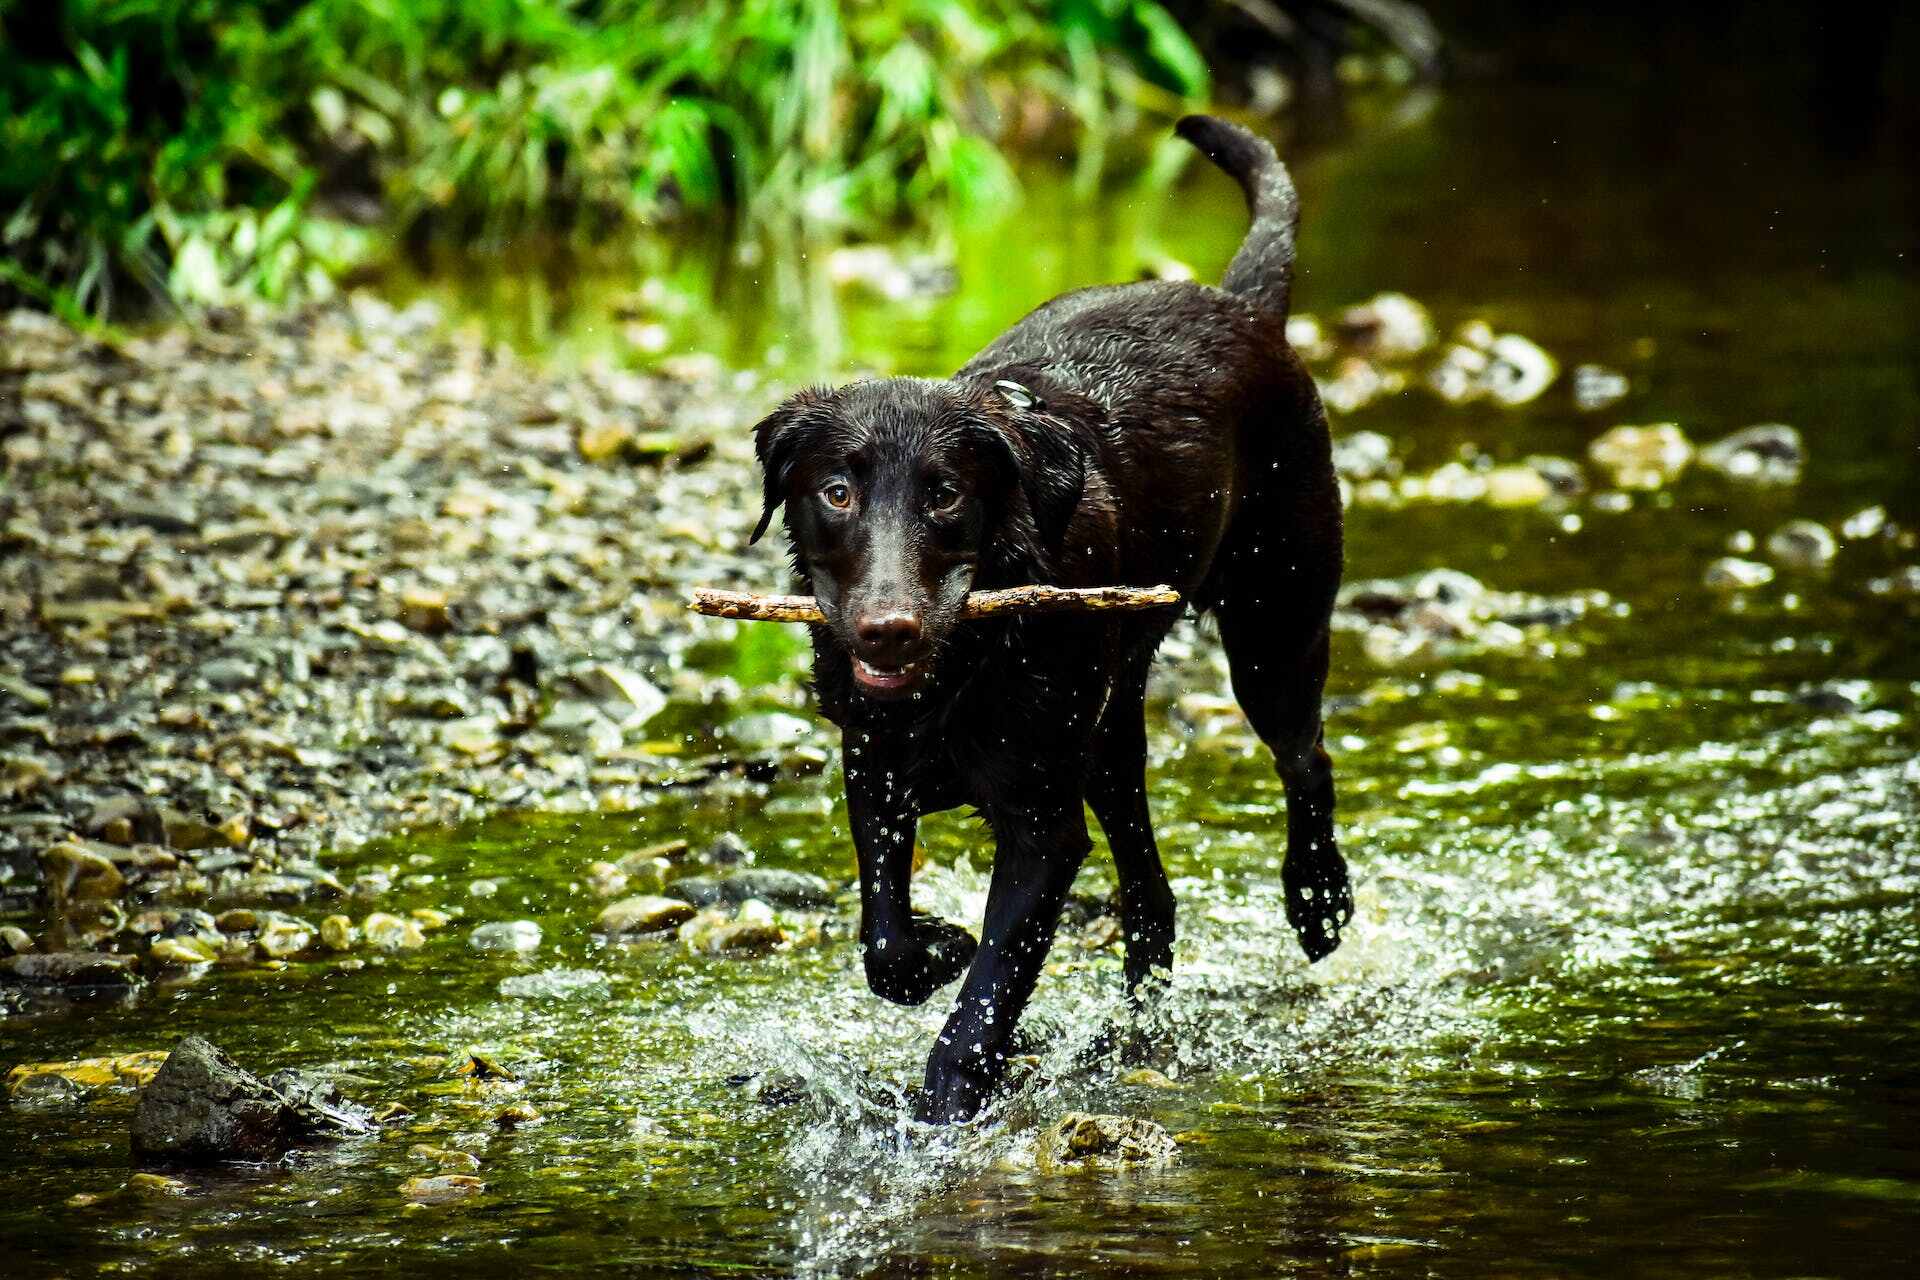 A black dog carrying a stick in their mouth in a pond